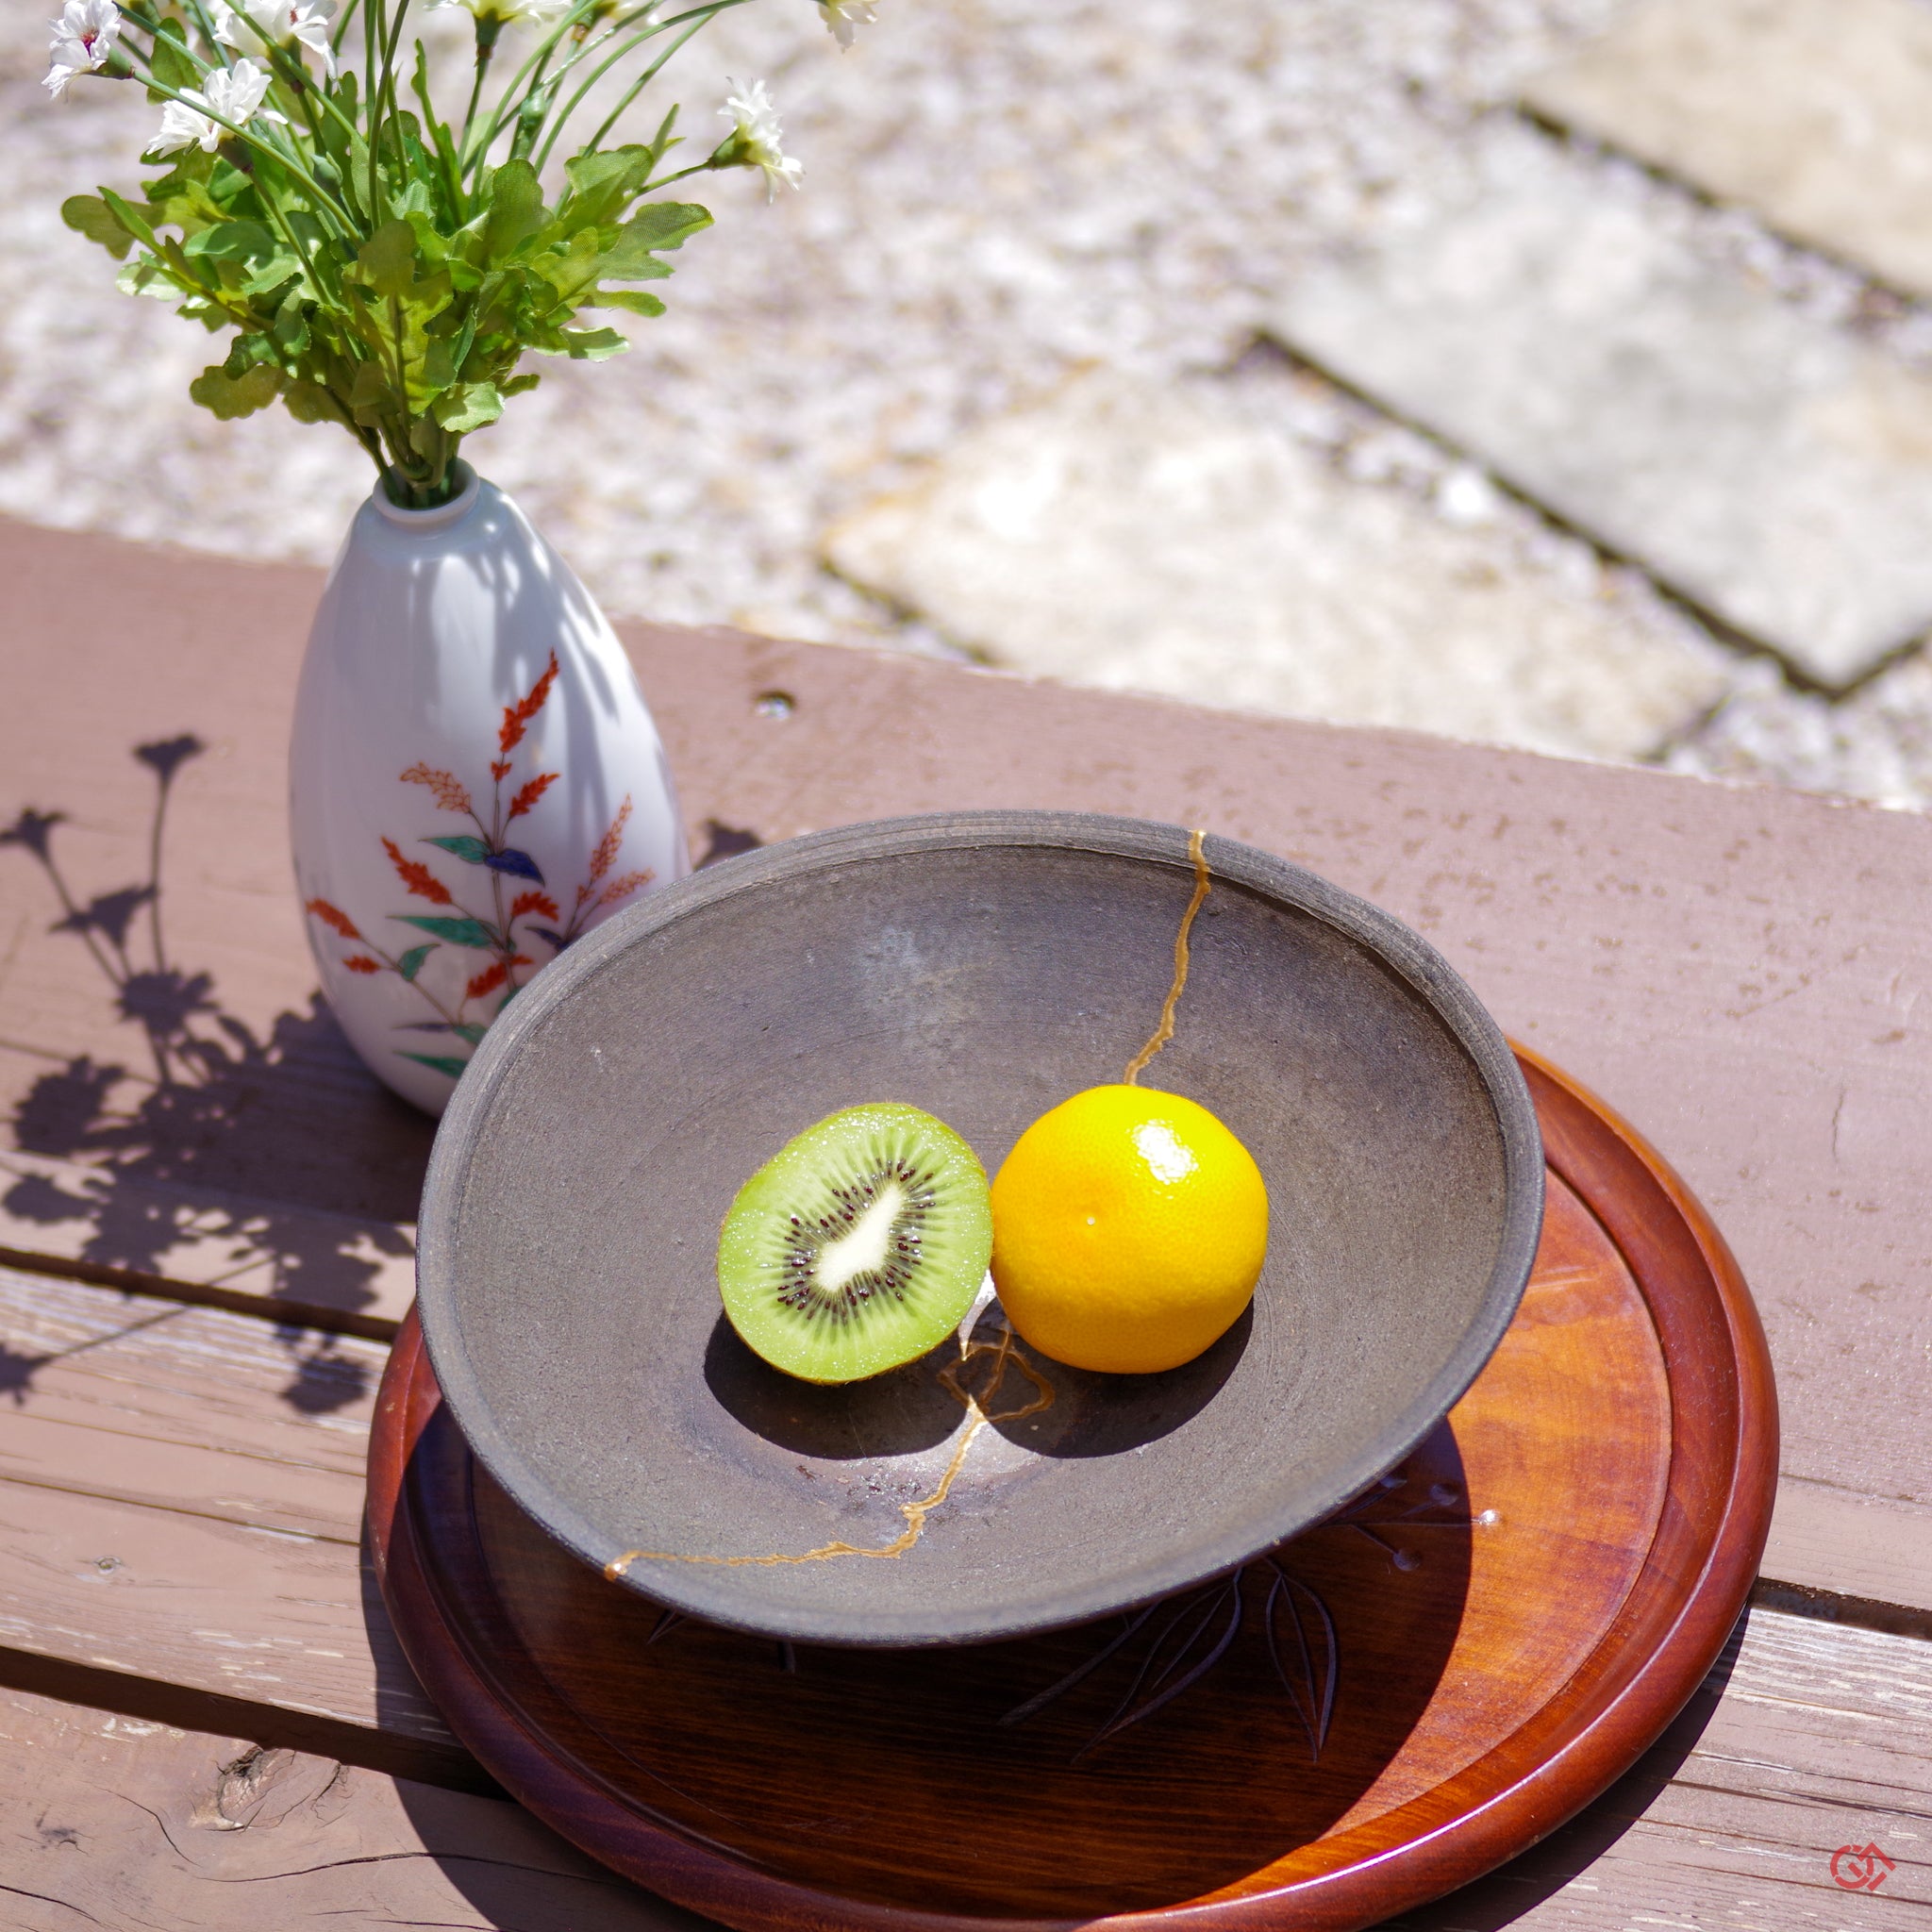 Japanese Kintsugi Pottery with some fruits